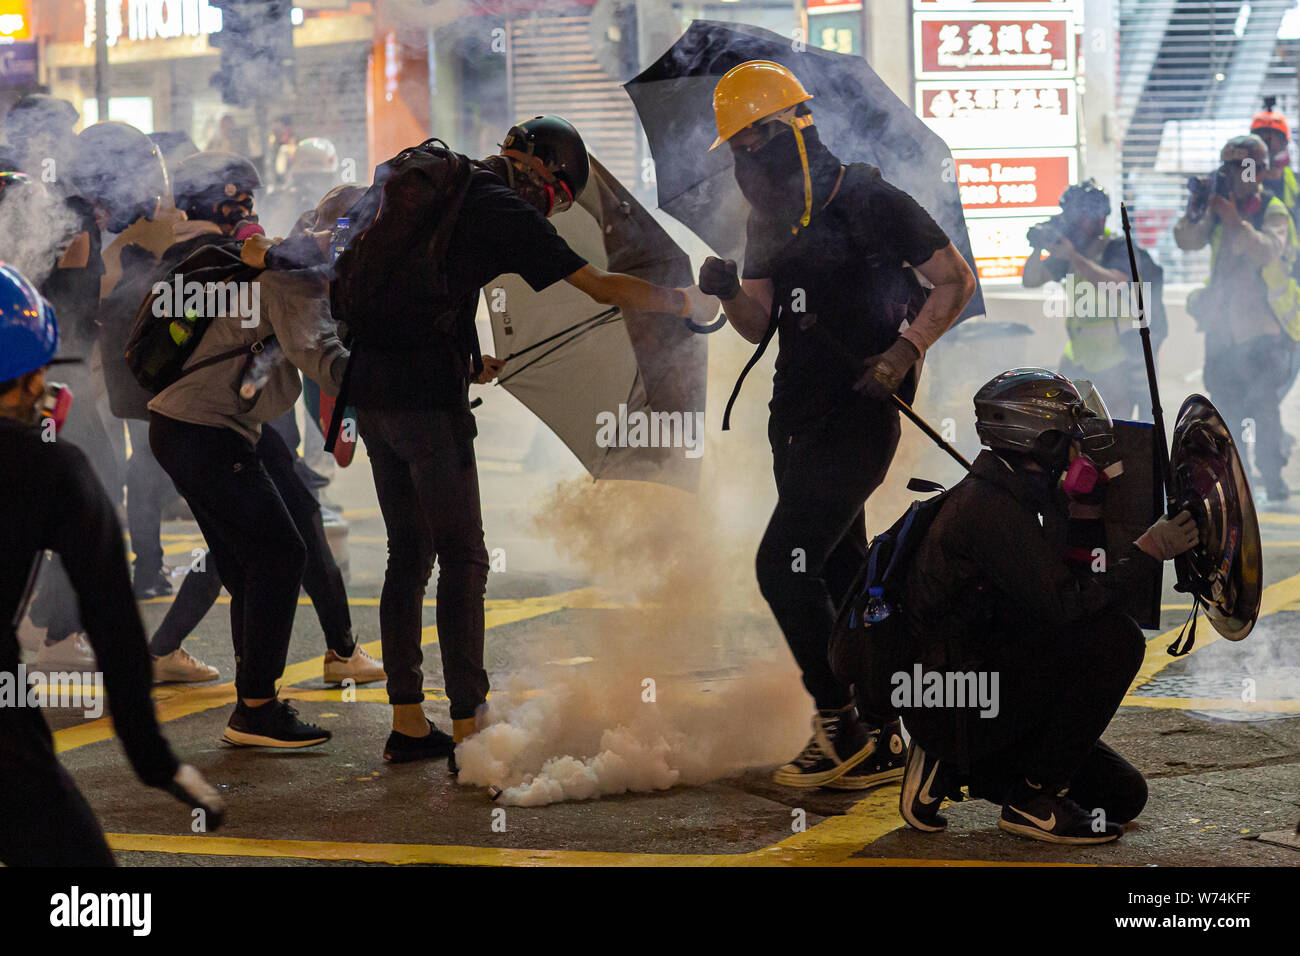 Protesters trying to put out tear gas bombs thrown by police during protests against the extradition bill in Hong Kong.Pro-democracy protesters have continued weekly rallies on the streets of Hong Kong against a controversial extradition bill since June 9, as the city plunged into crisis after waves of demonstrations and several violent clashes. Hong Kong's Chief Executive Carrie Lam apologized for introducing the bill and declared it 'dead', however protesters have continued to draw large crowds with demands for Lam's resignation and completely withdraw the bill. Stock Photo